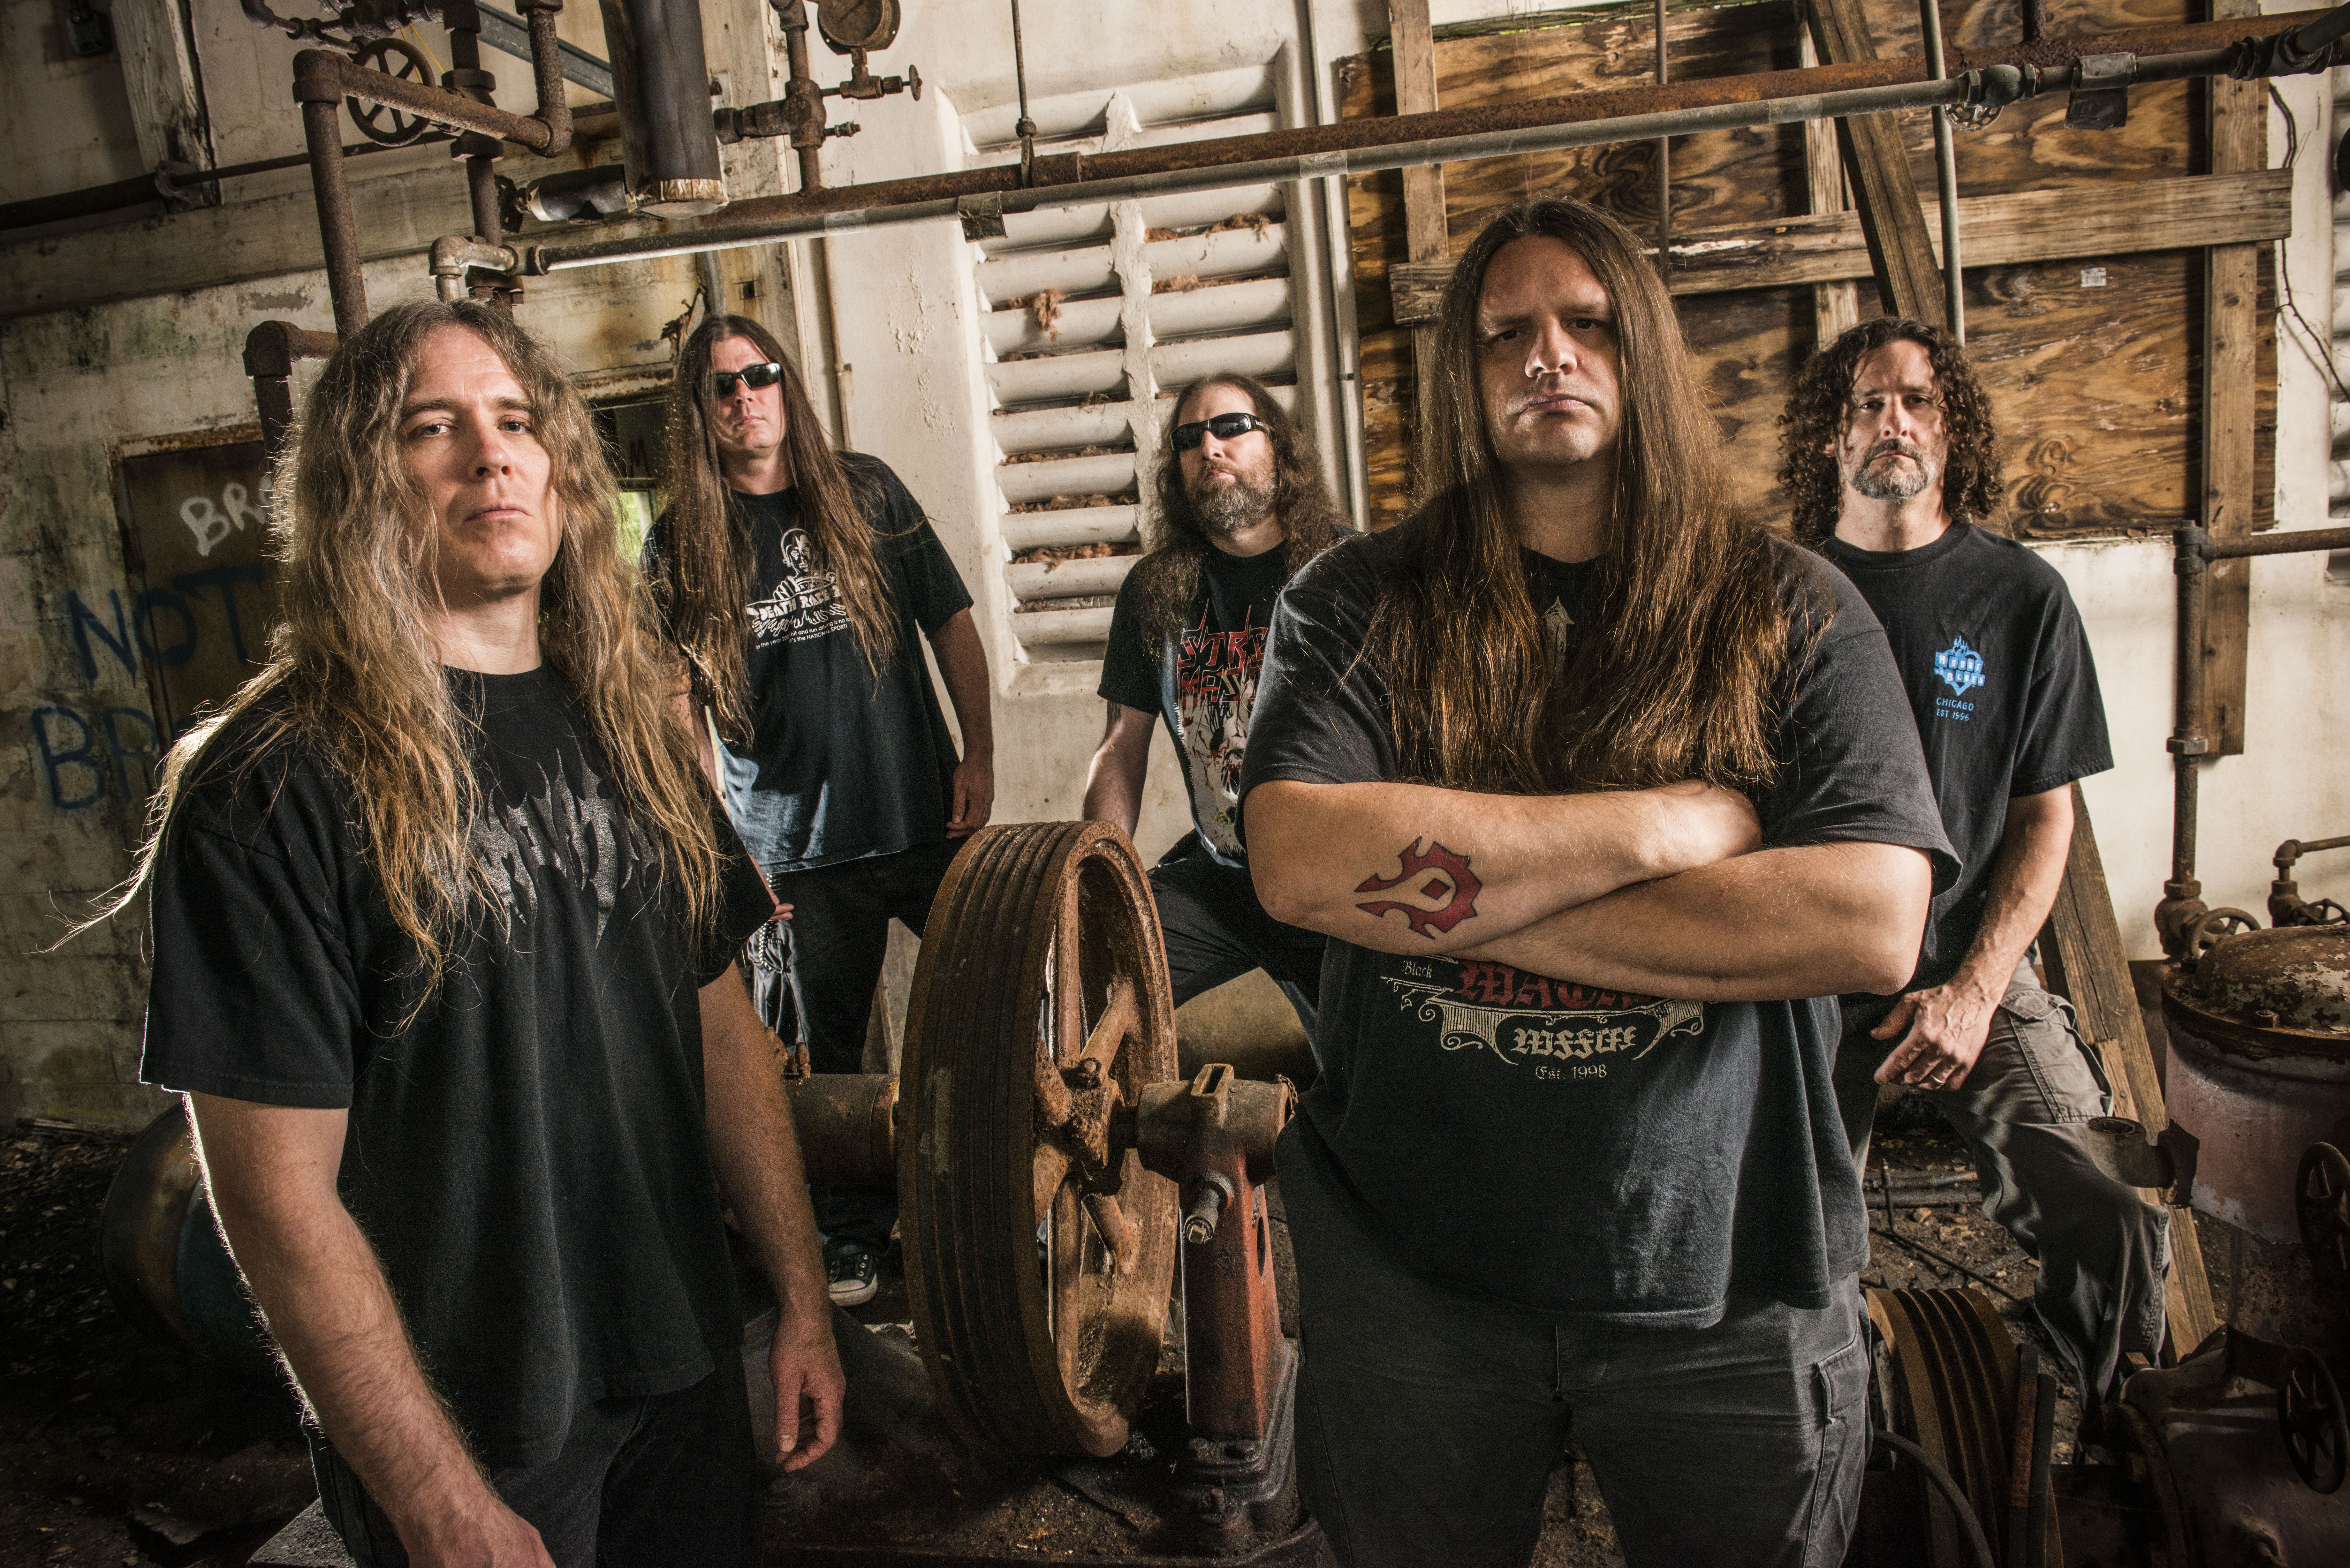 Music Cannibal Corpse HD Wallpaper | Background Image